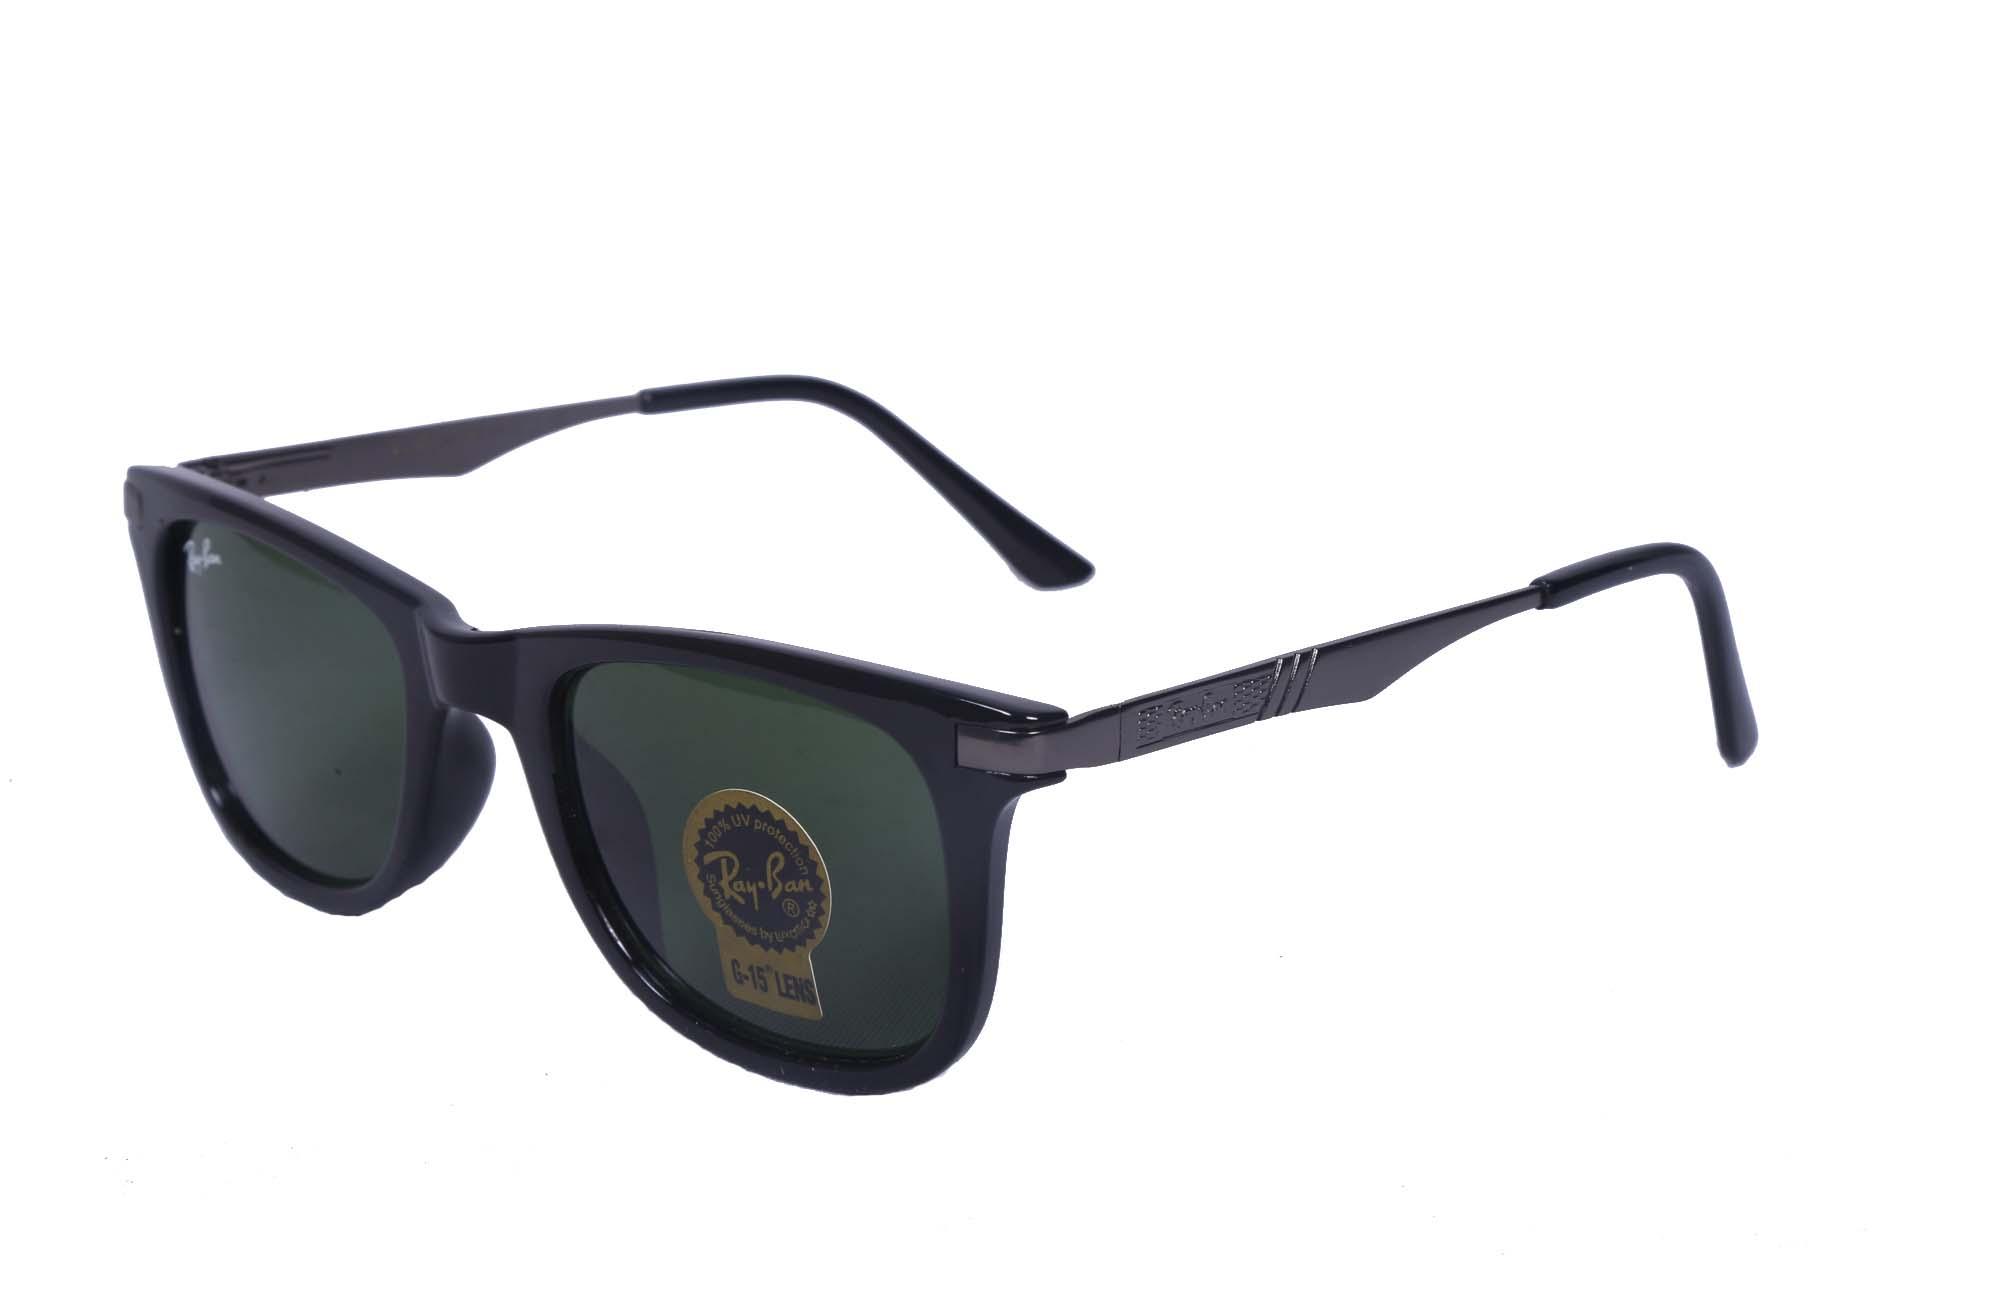 cooling glass ray ban black